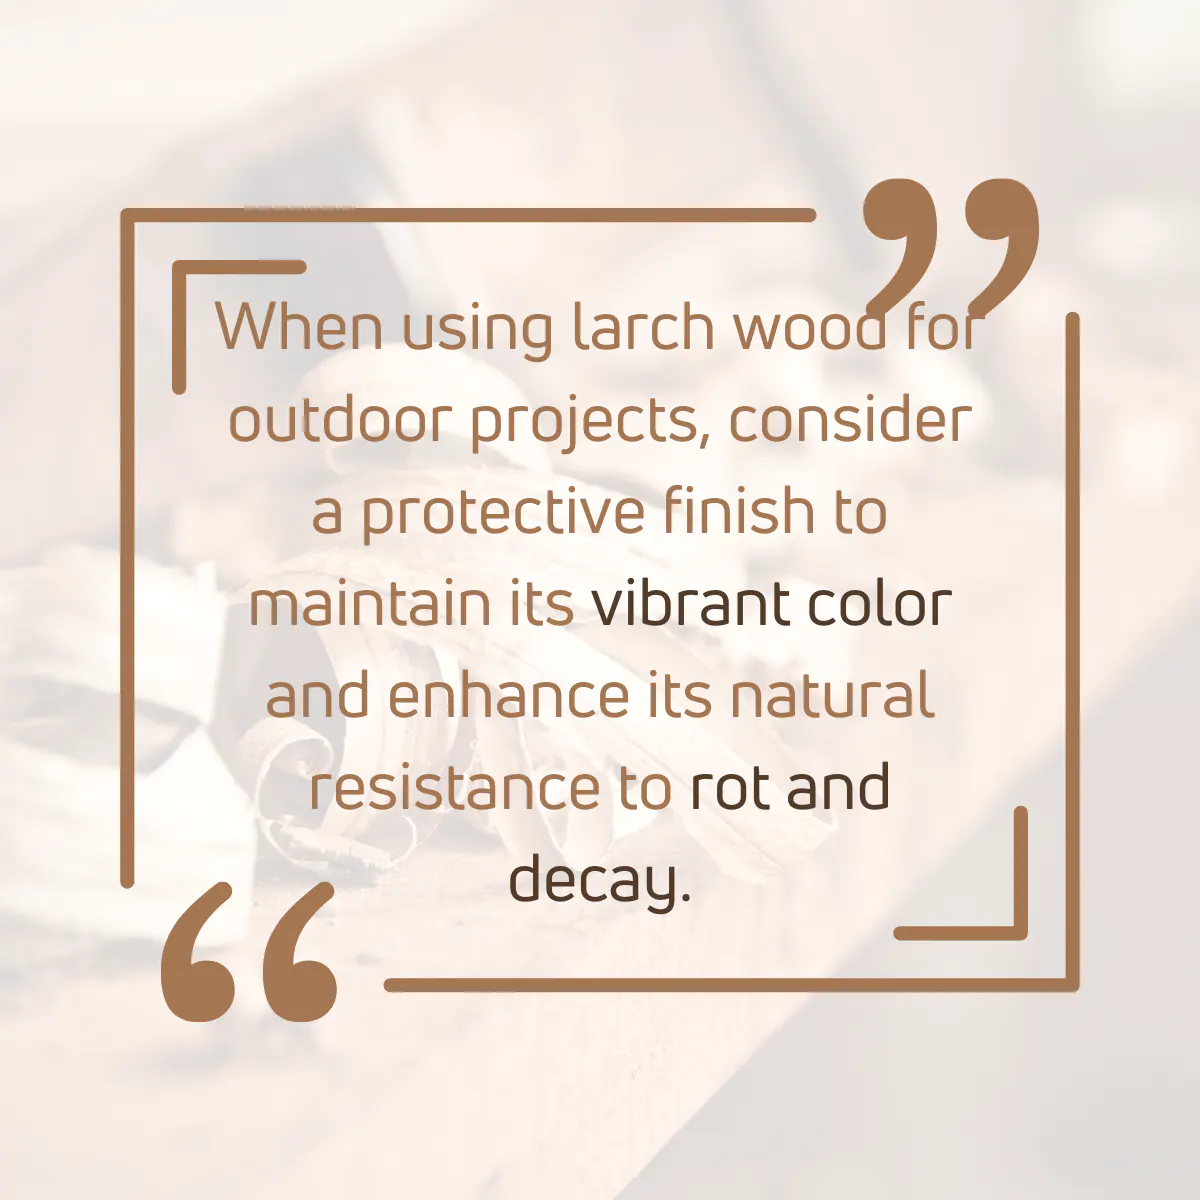 Tip for working with Larch